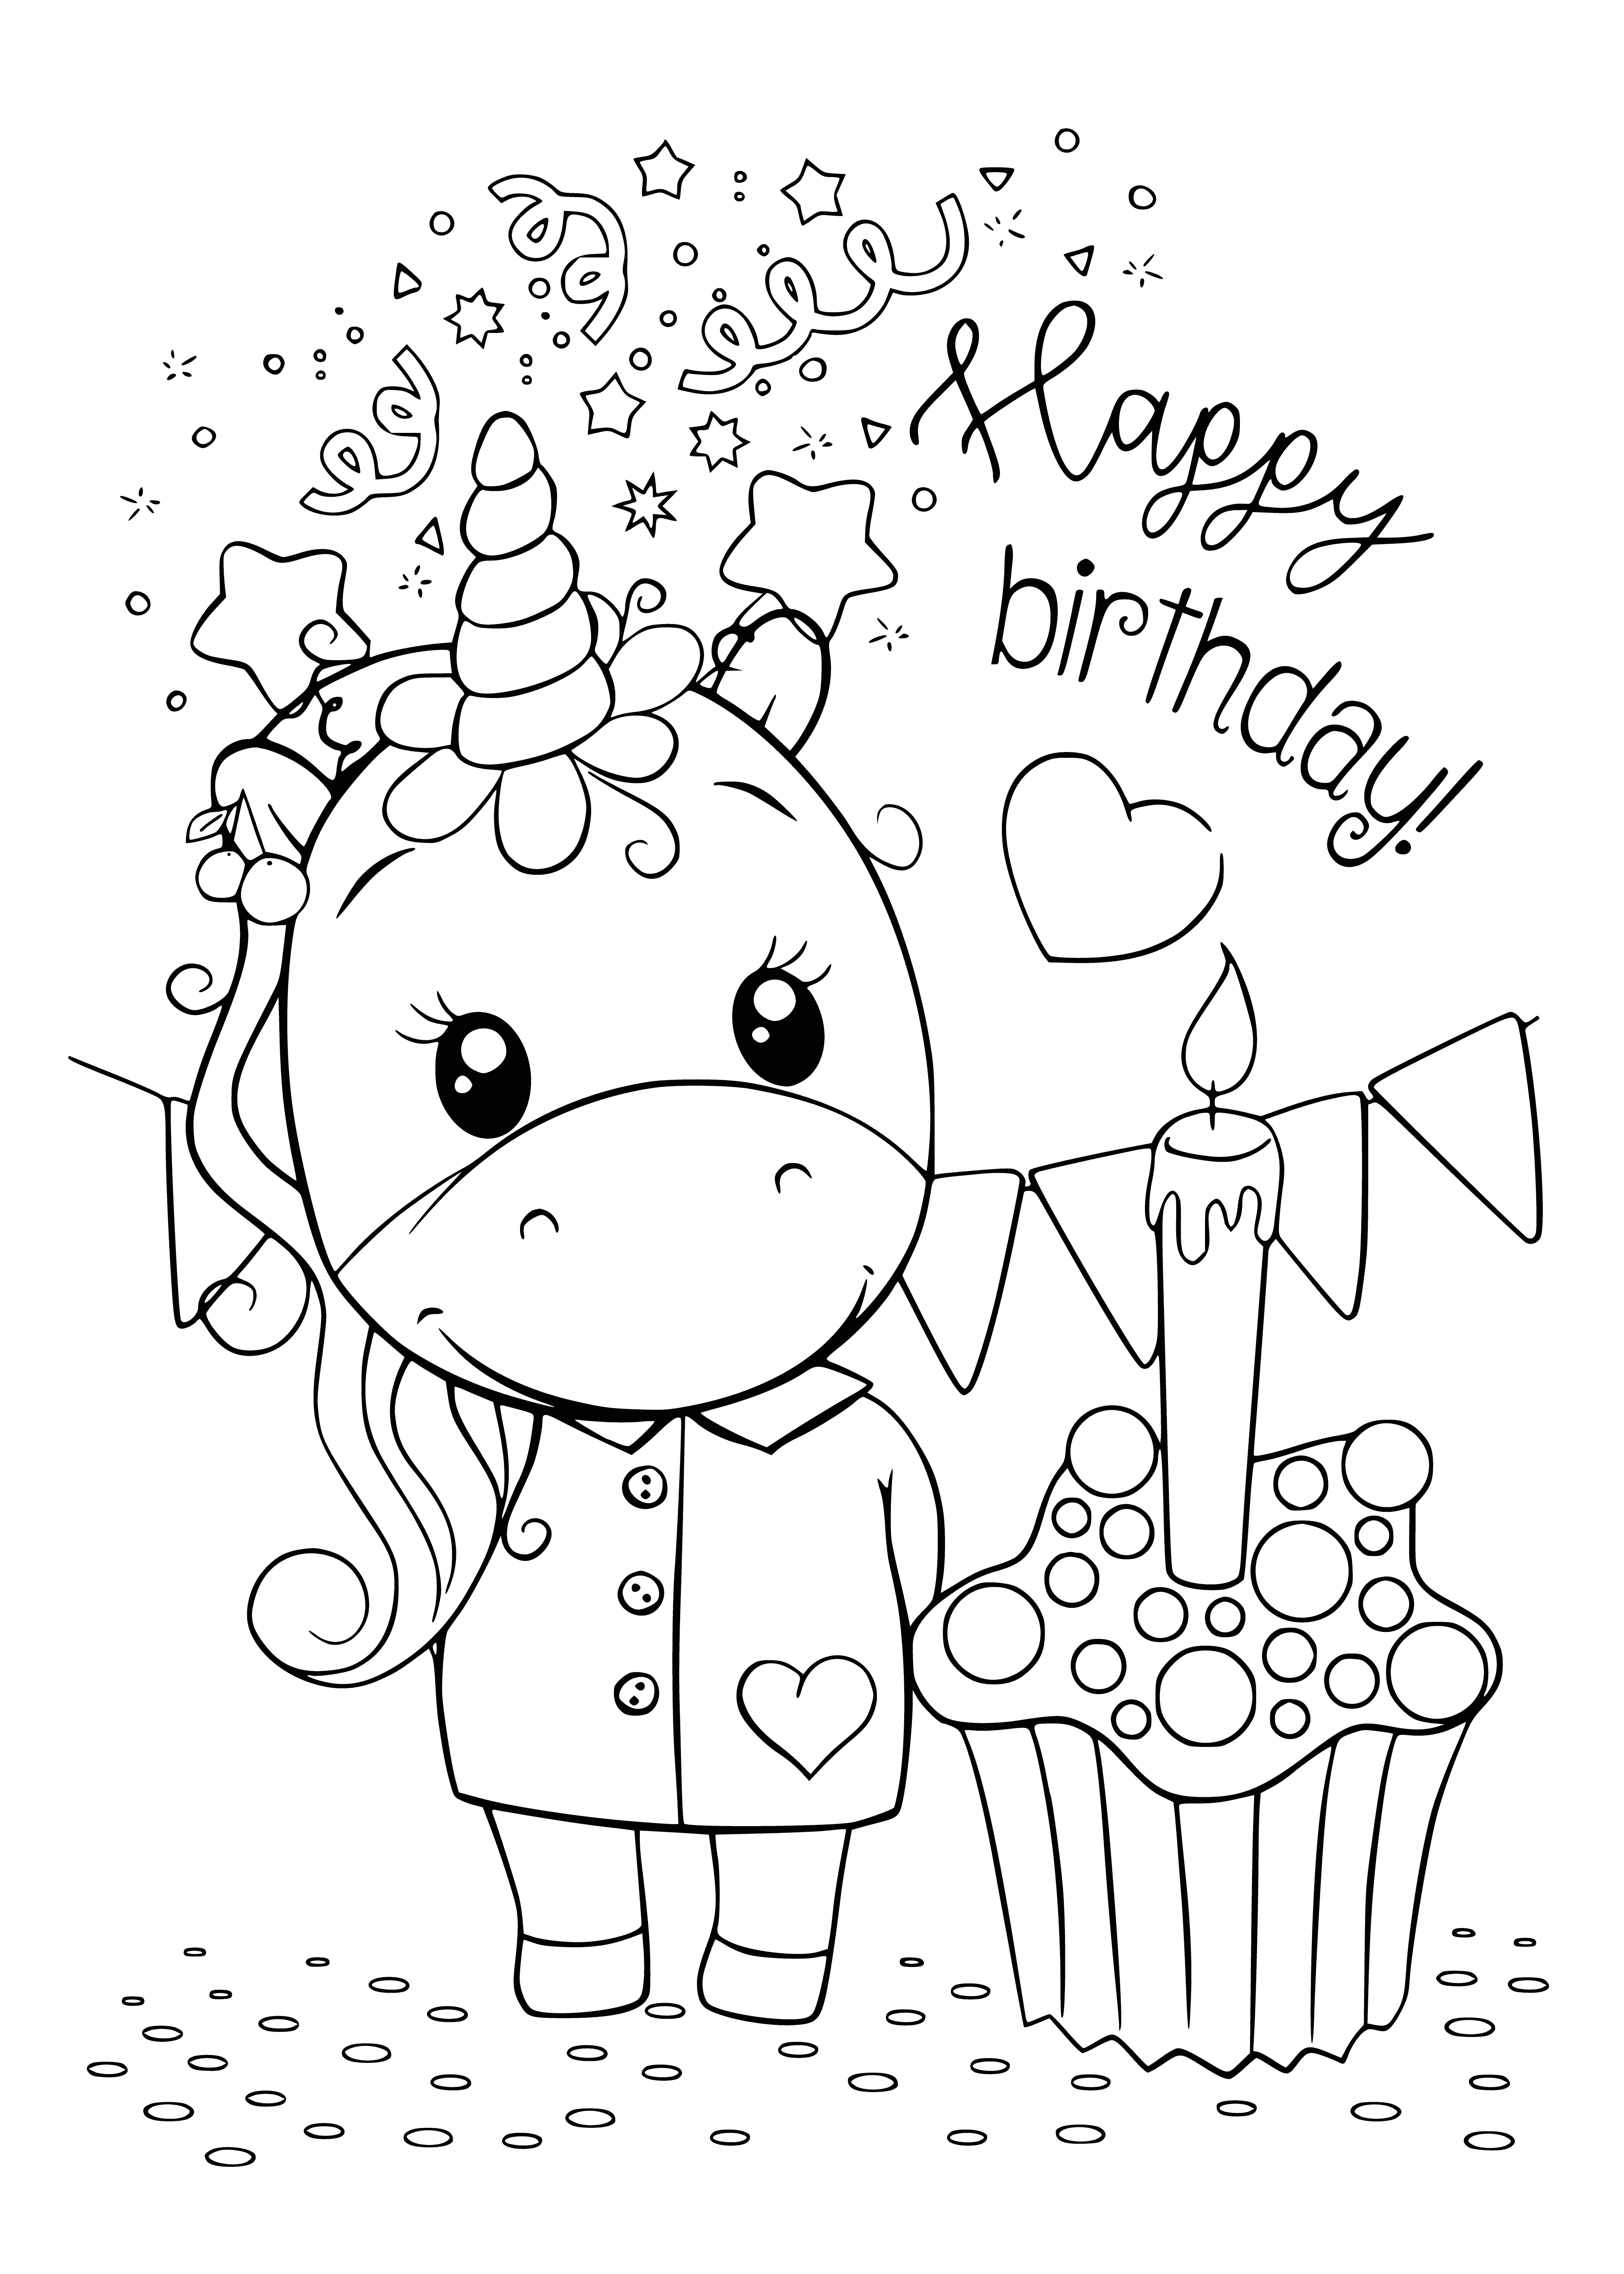 coloring page: Six Kawaii Characters celebrate a birthday with a cake, presents & balloons on this cheerful coloring page - perfect for birthday celebrations!